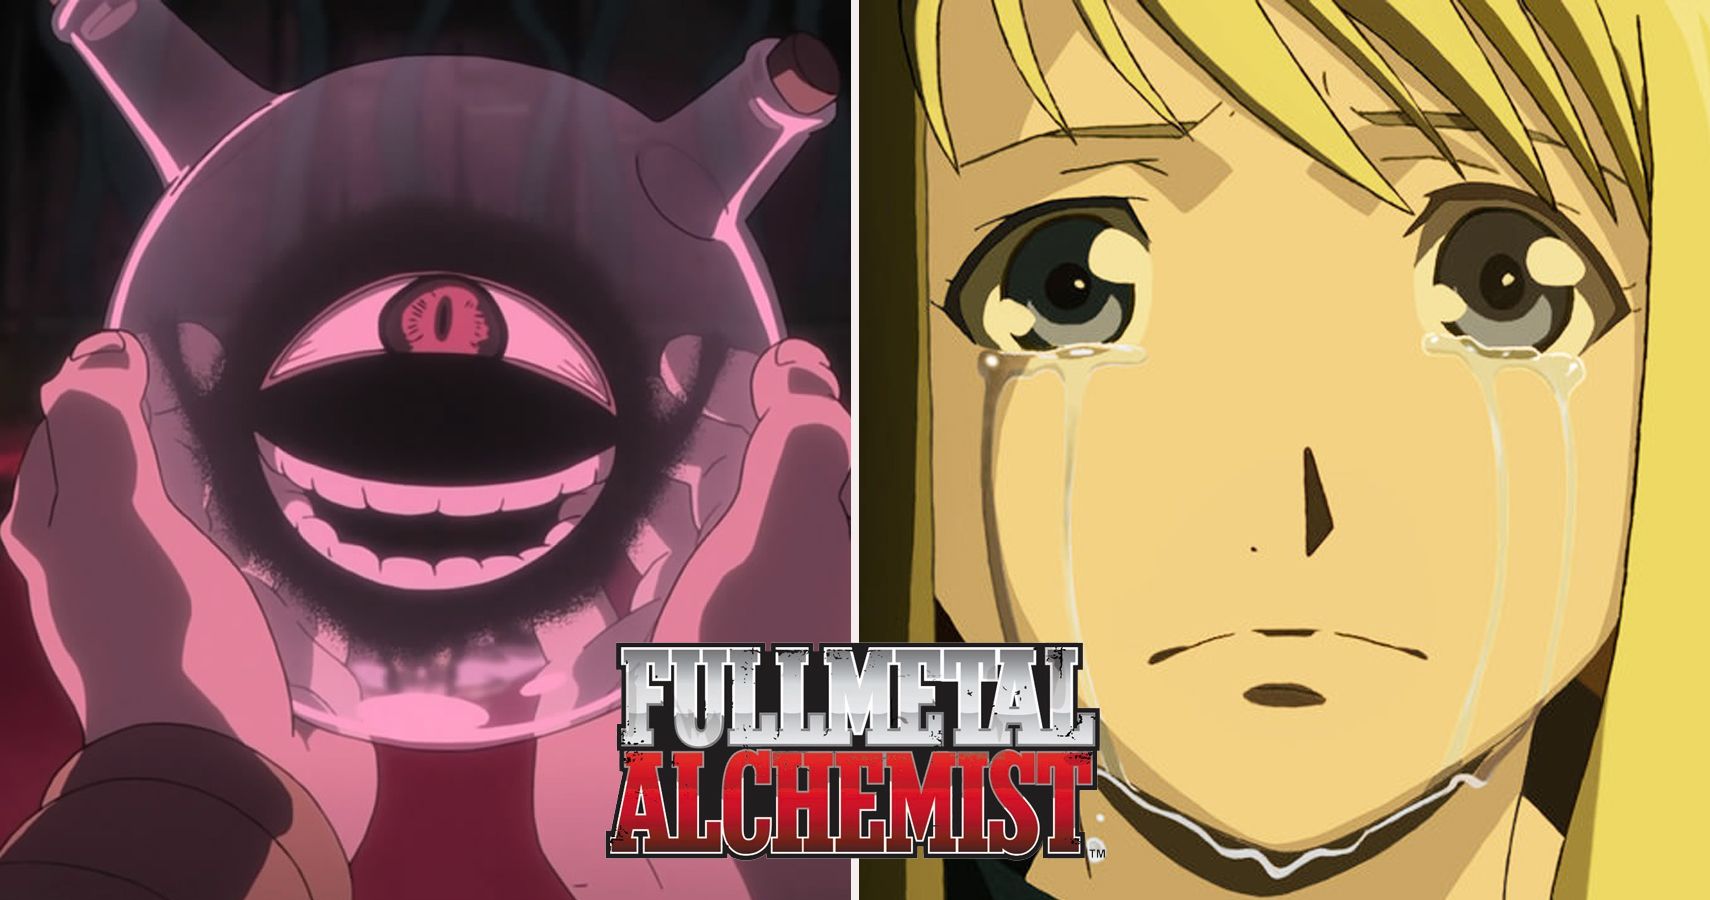 Dark Secrets About Fullmetal Alchemist You Really Don't Want To Know